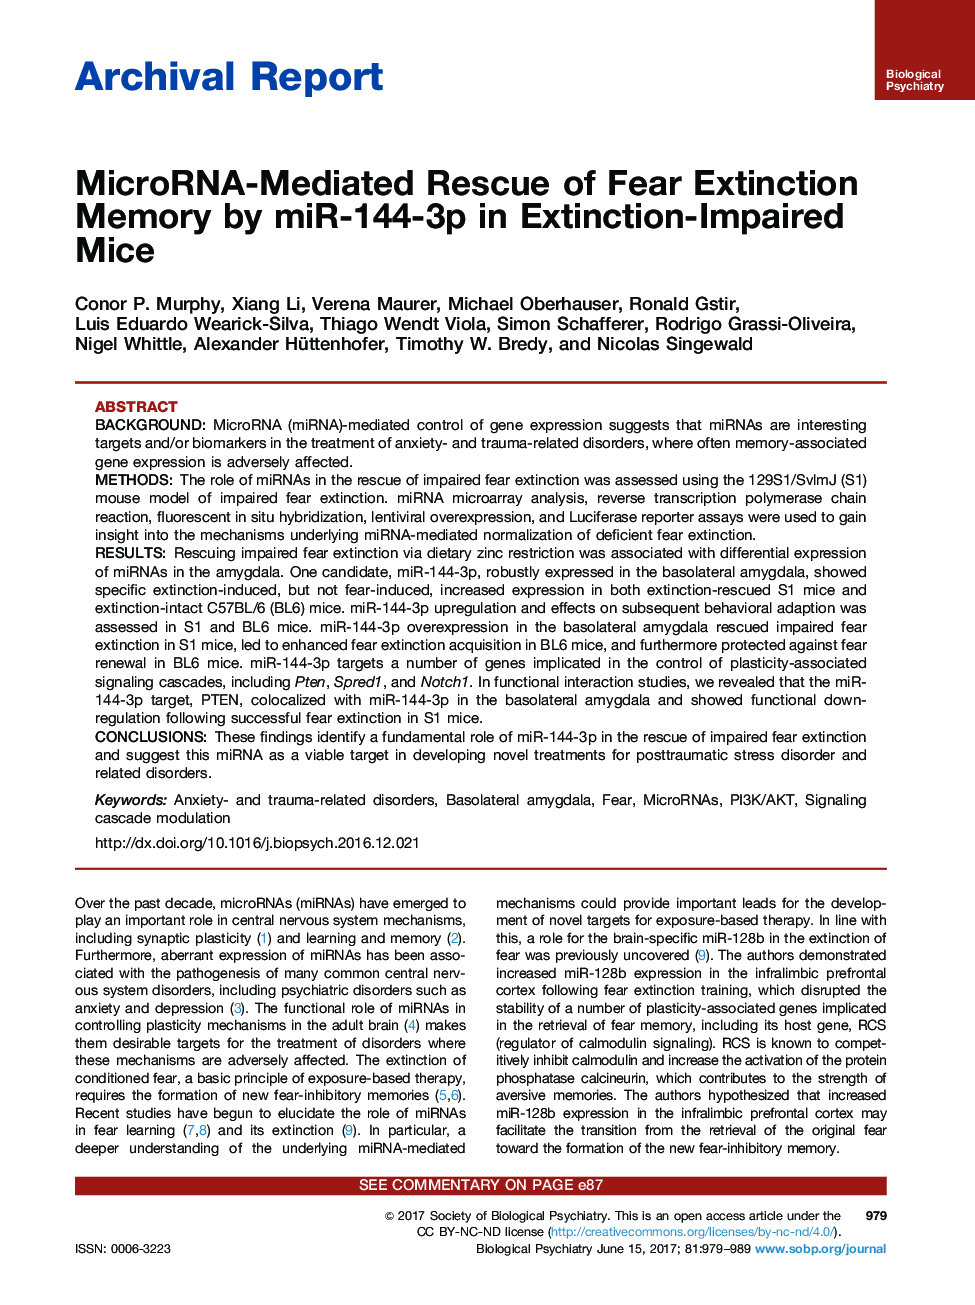 Archival ReportMicroRNA-Mediated Rescue of Fear Extinction Memory by miR-144-3p in Extinction-Impaired Mice